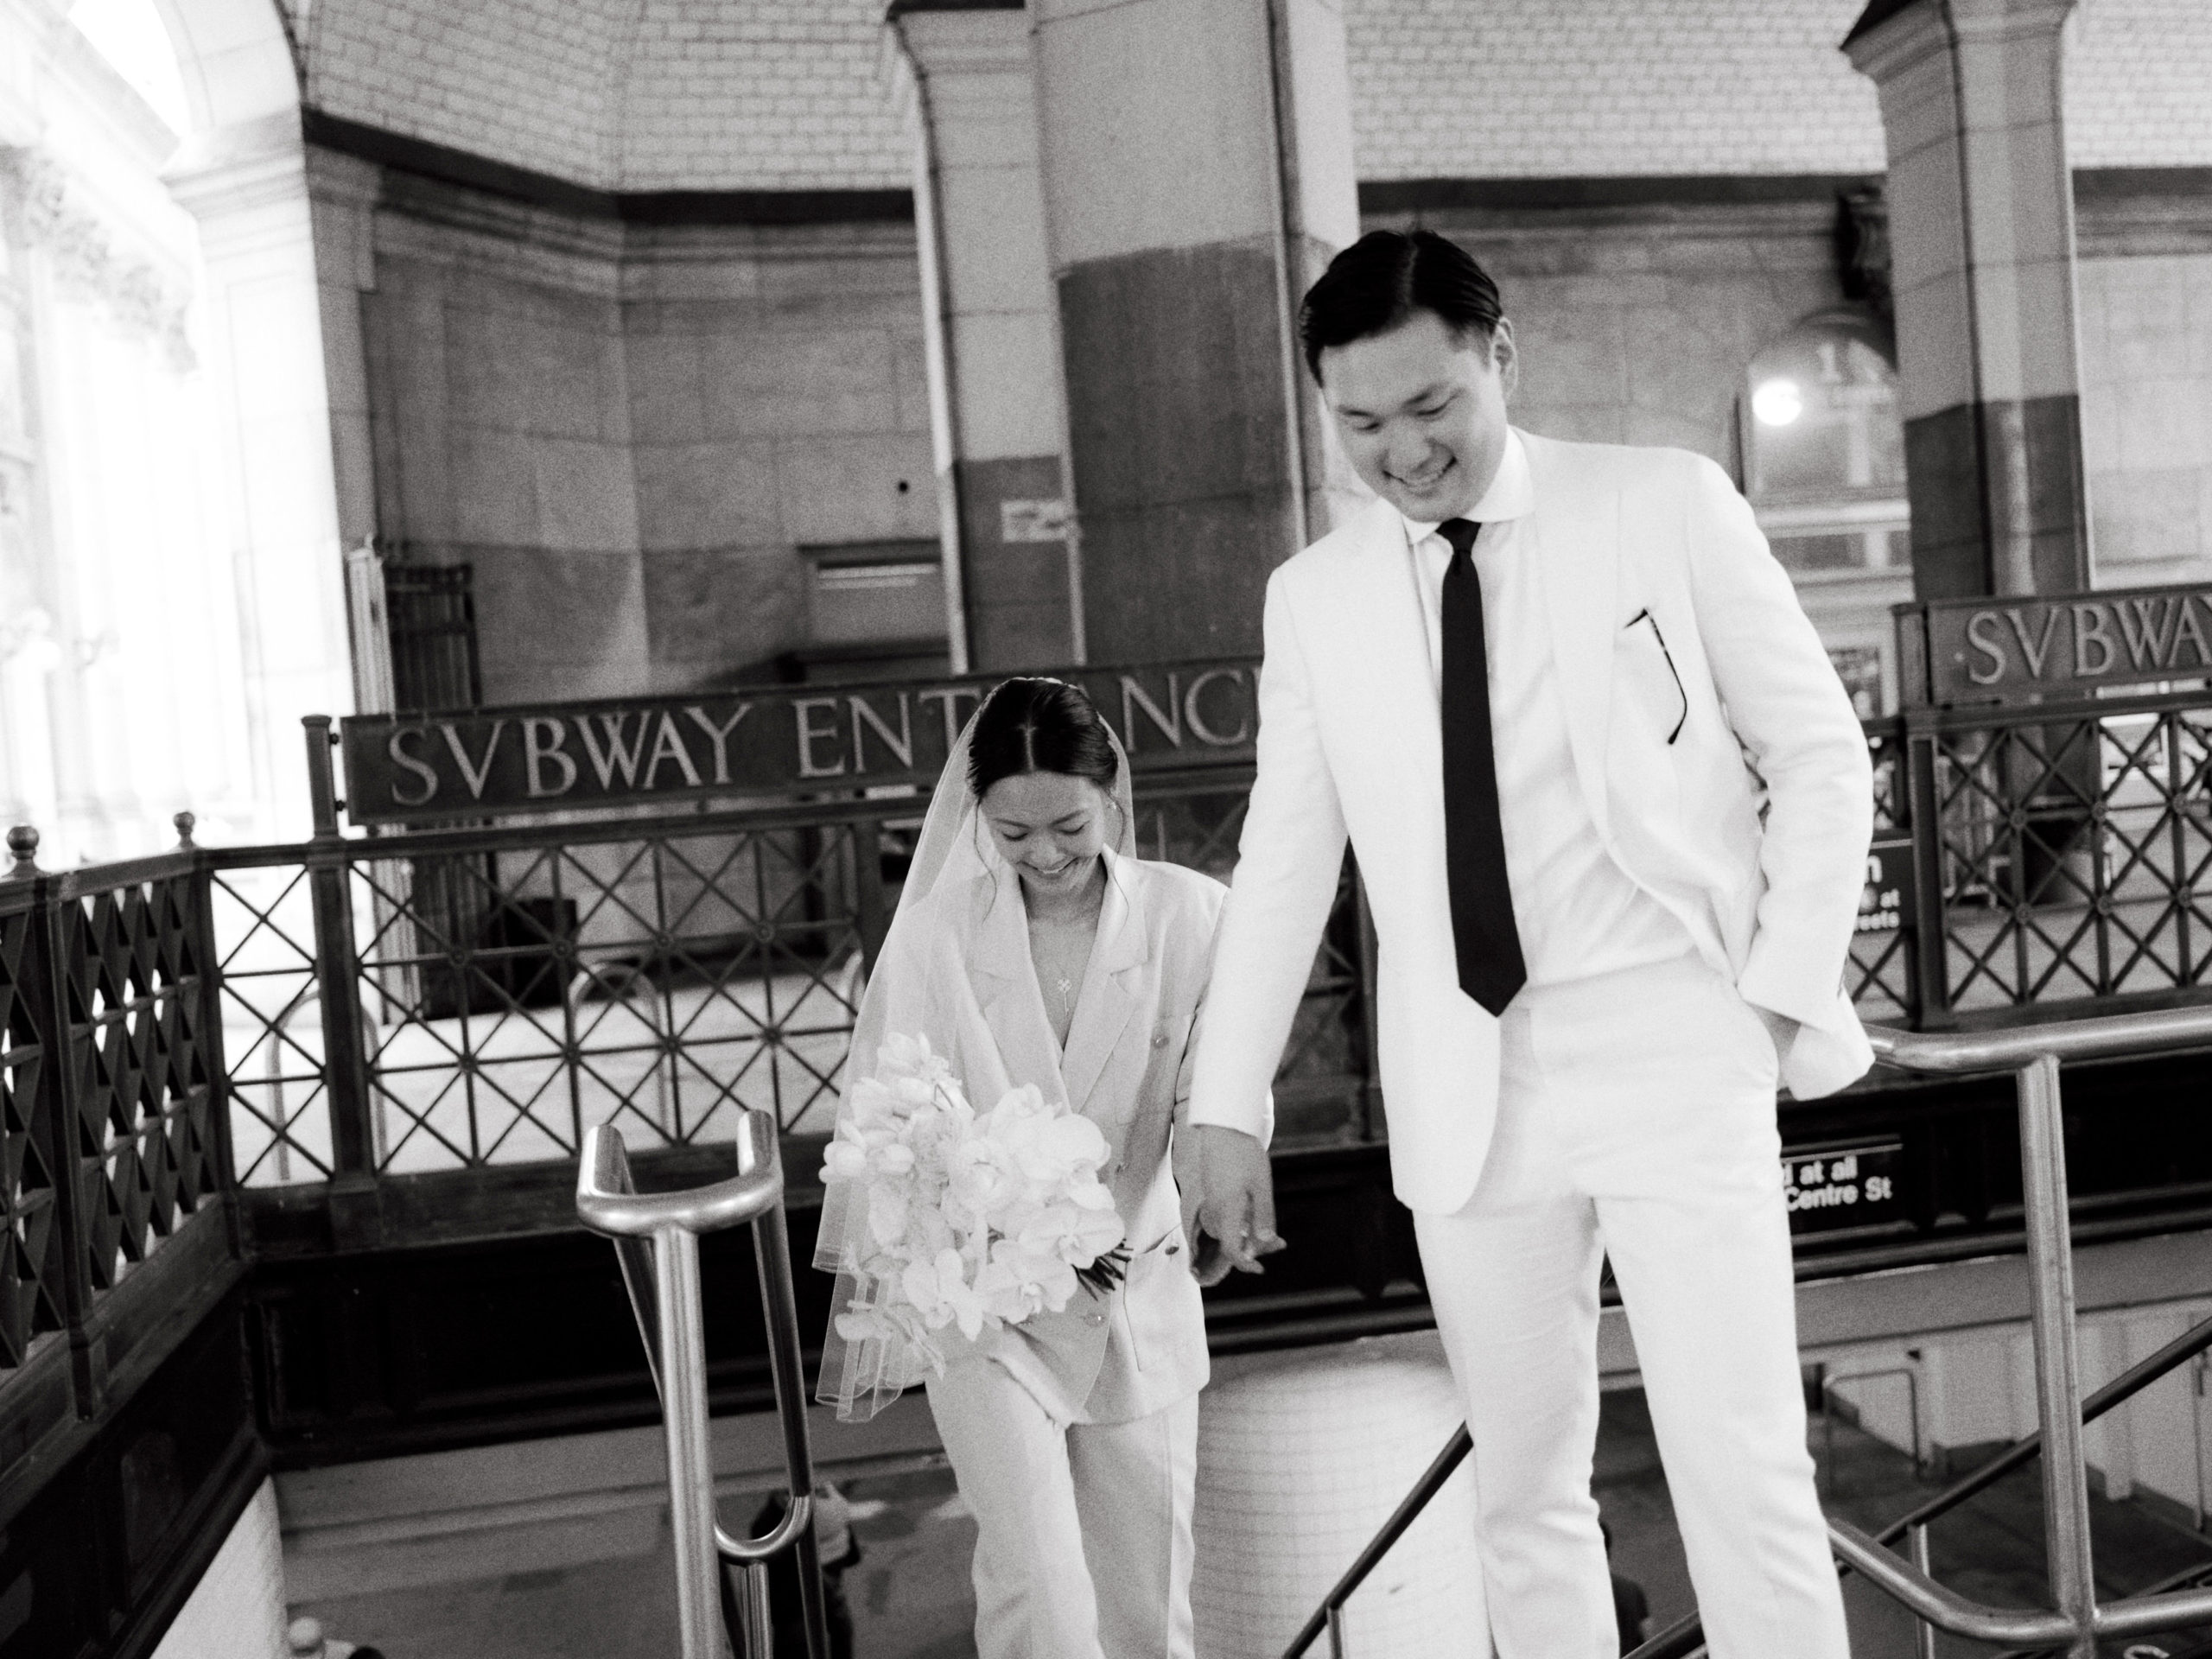 The newlyweds are walking in the subway terminal. Personalized NYC City Hall wedding image by Jenny Fu Studio